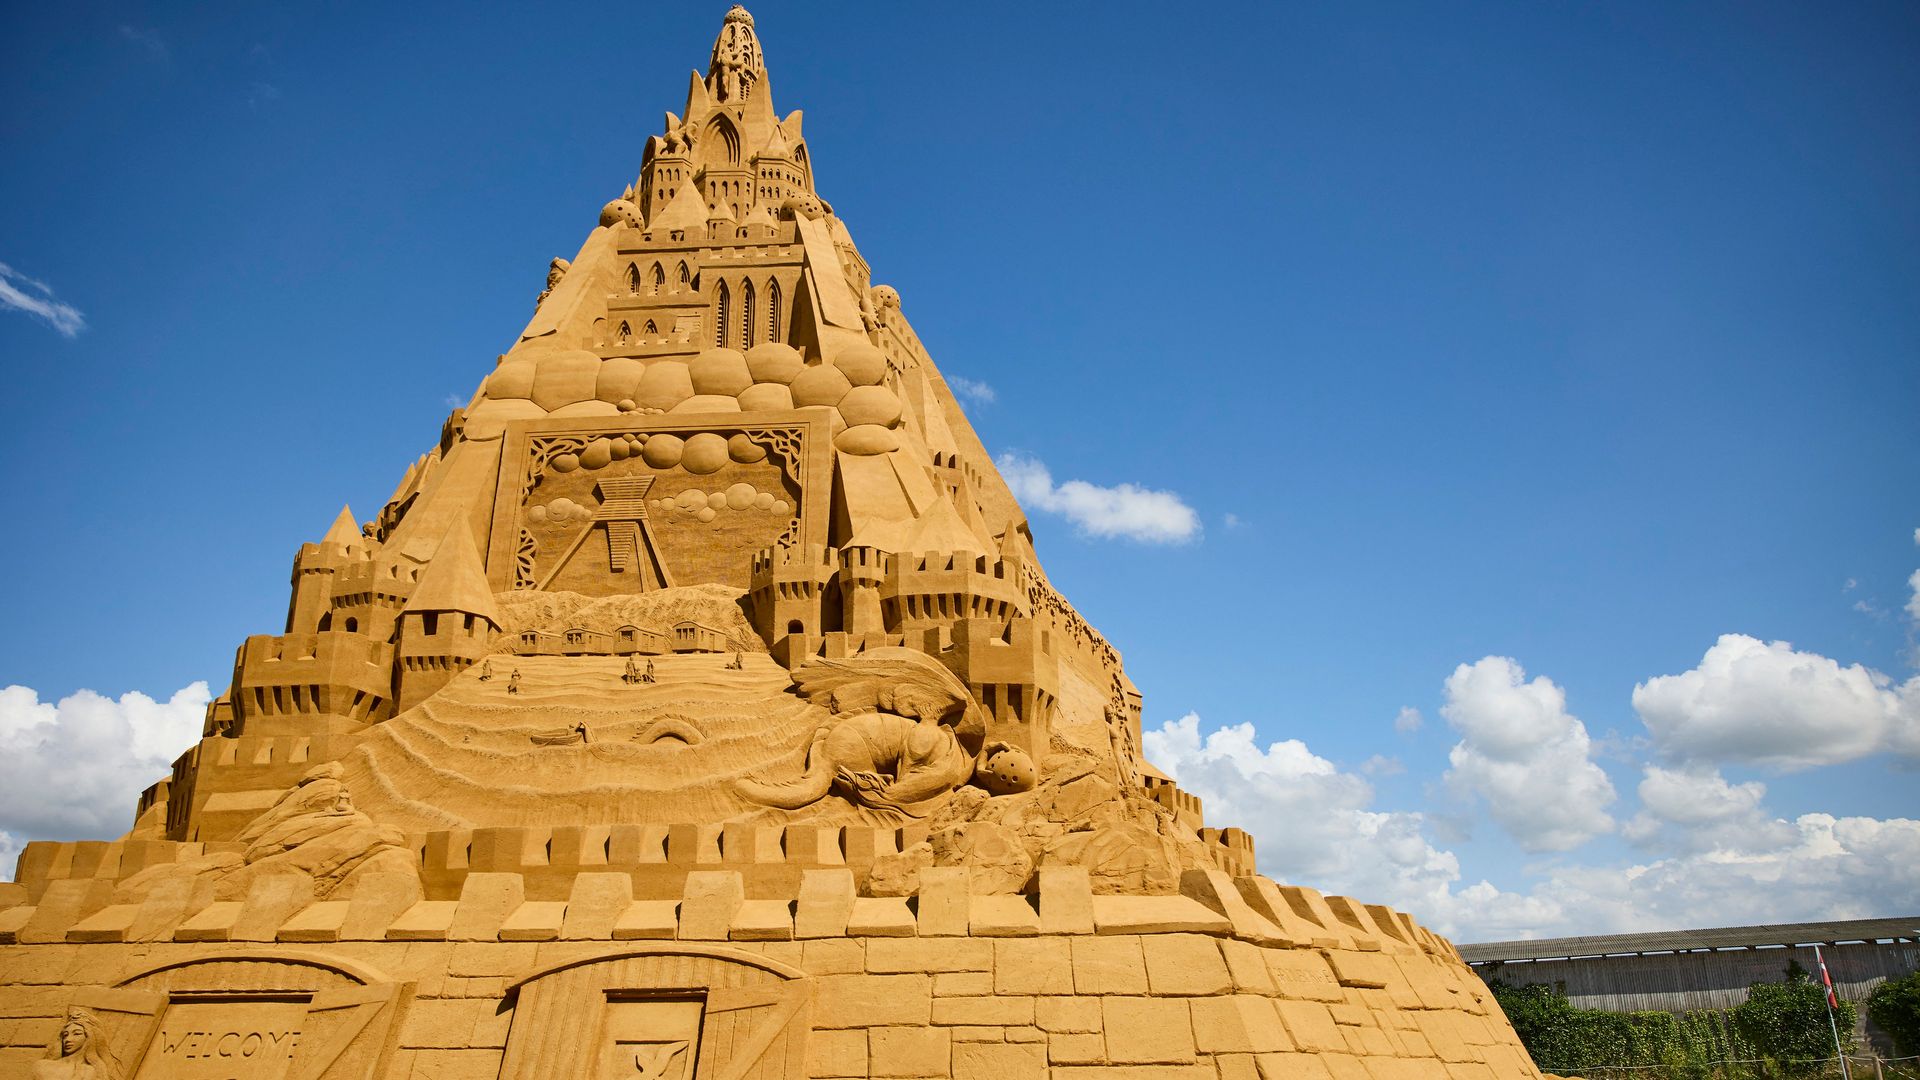 Picture of the tallest sandcastle